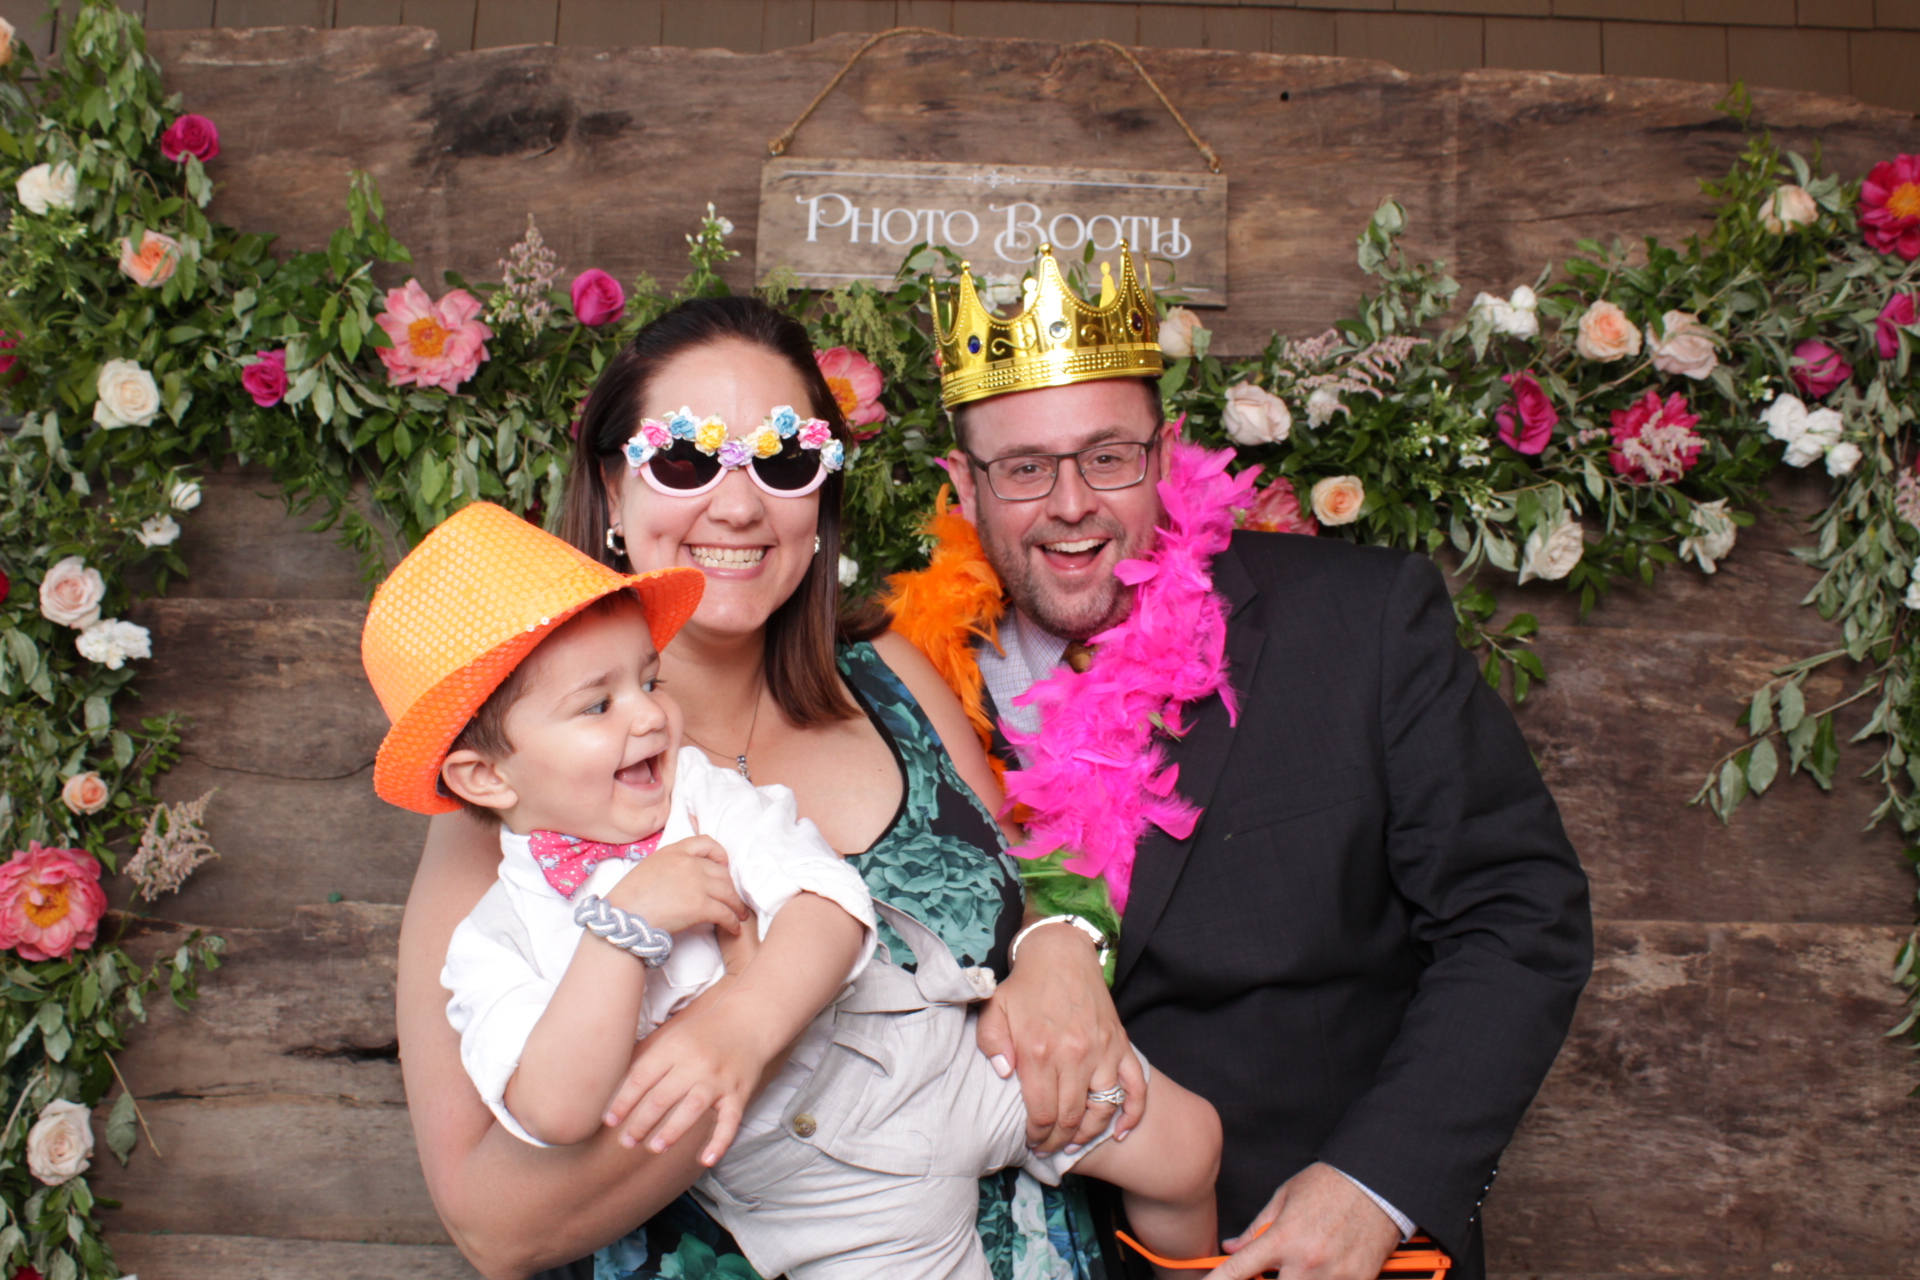 open-air-photo-booth-wedding-party-event-jennifer-peter-4